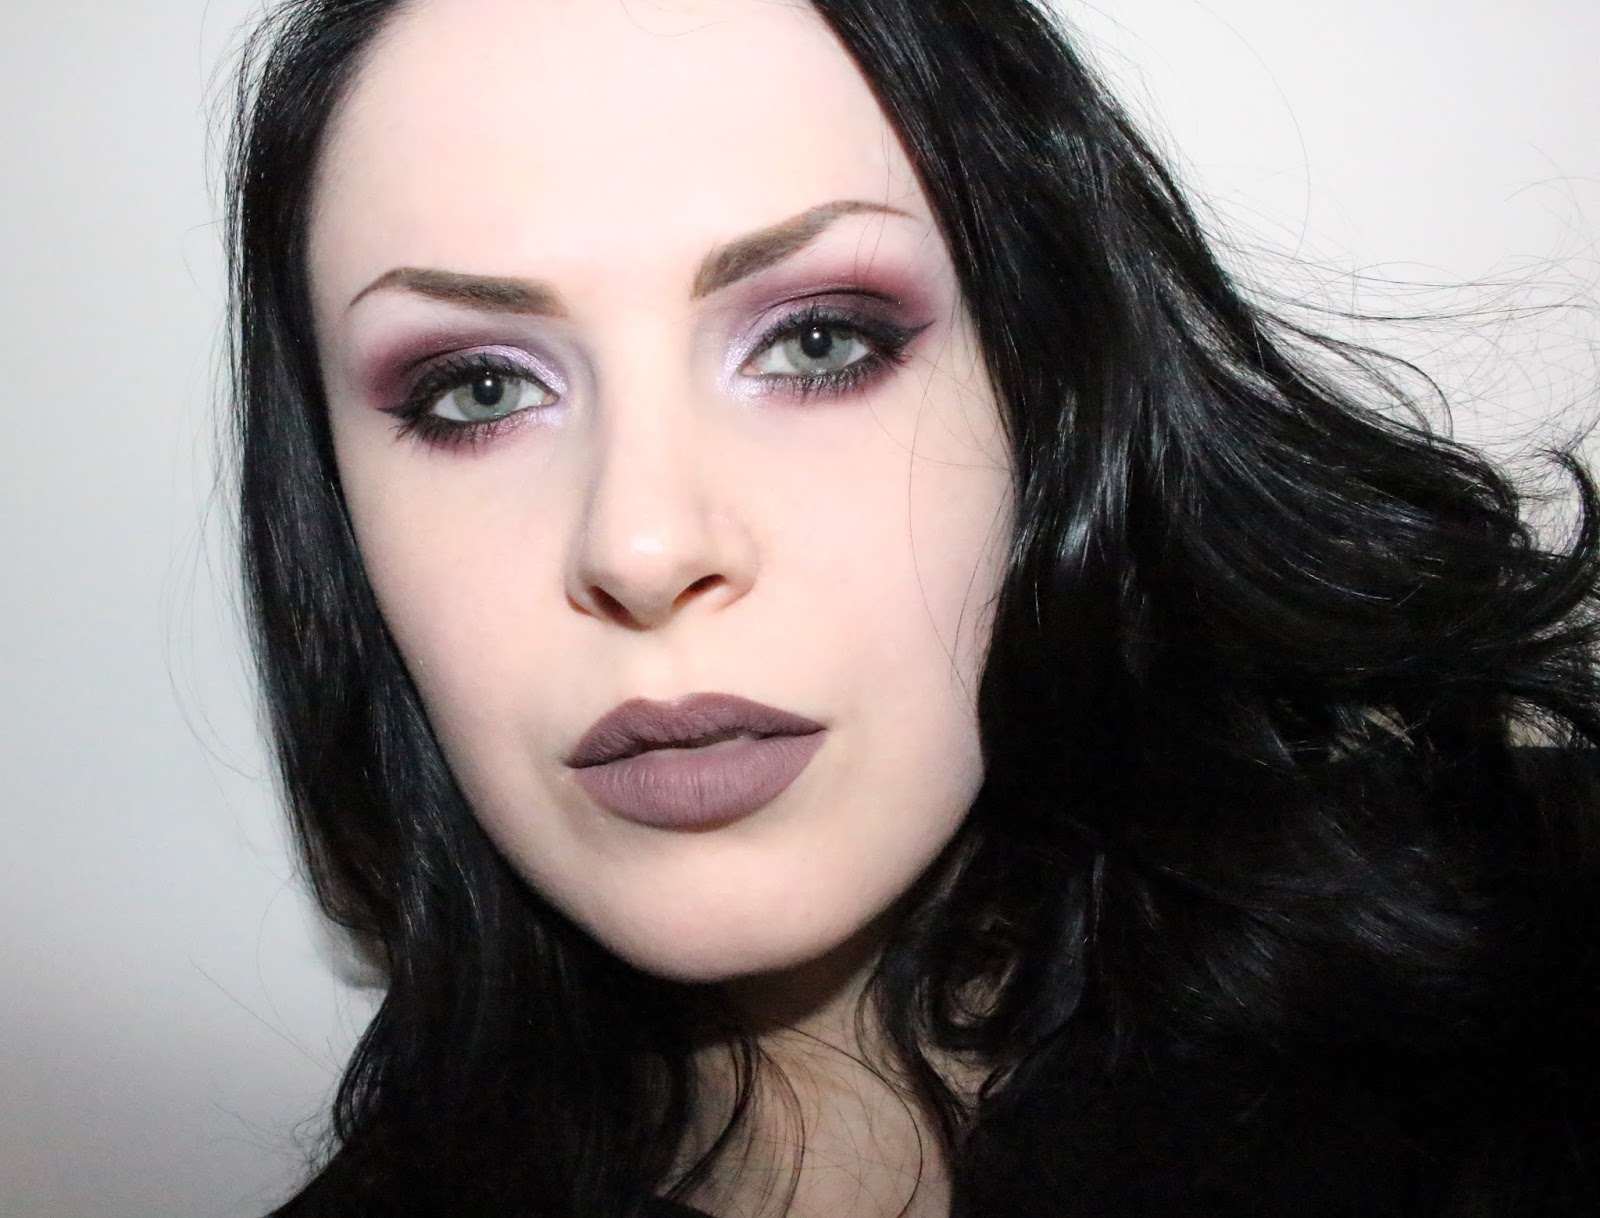 Vorpal Witch: Morphe Brushes 35P Plum Palette